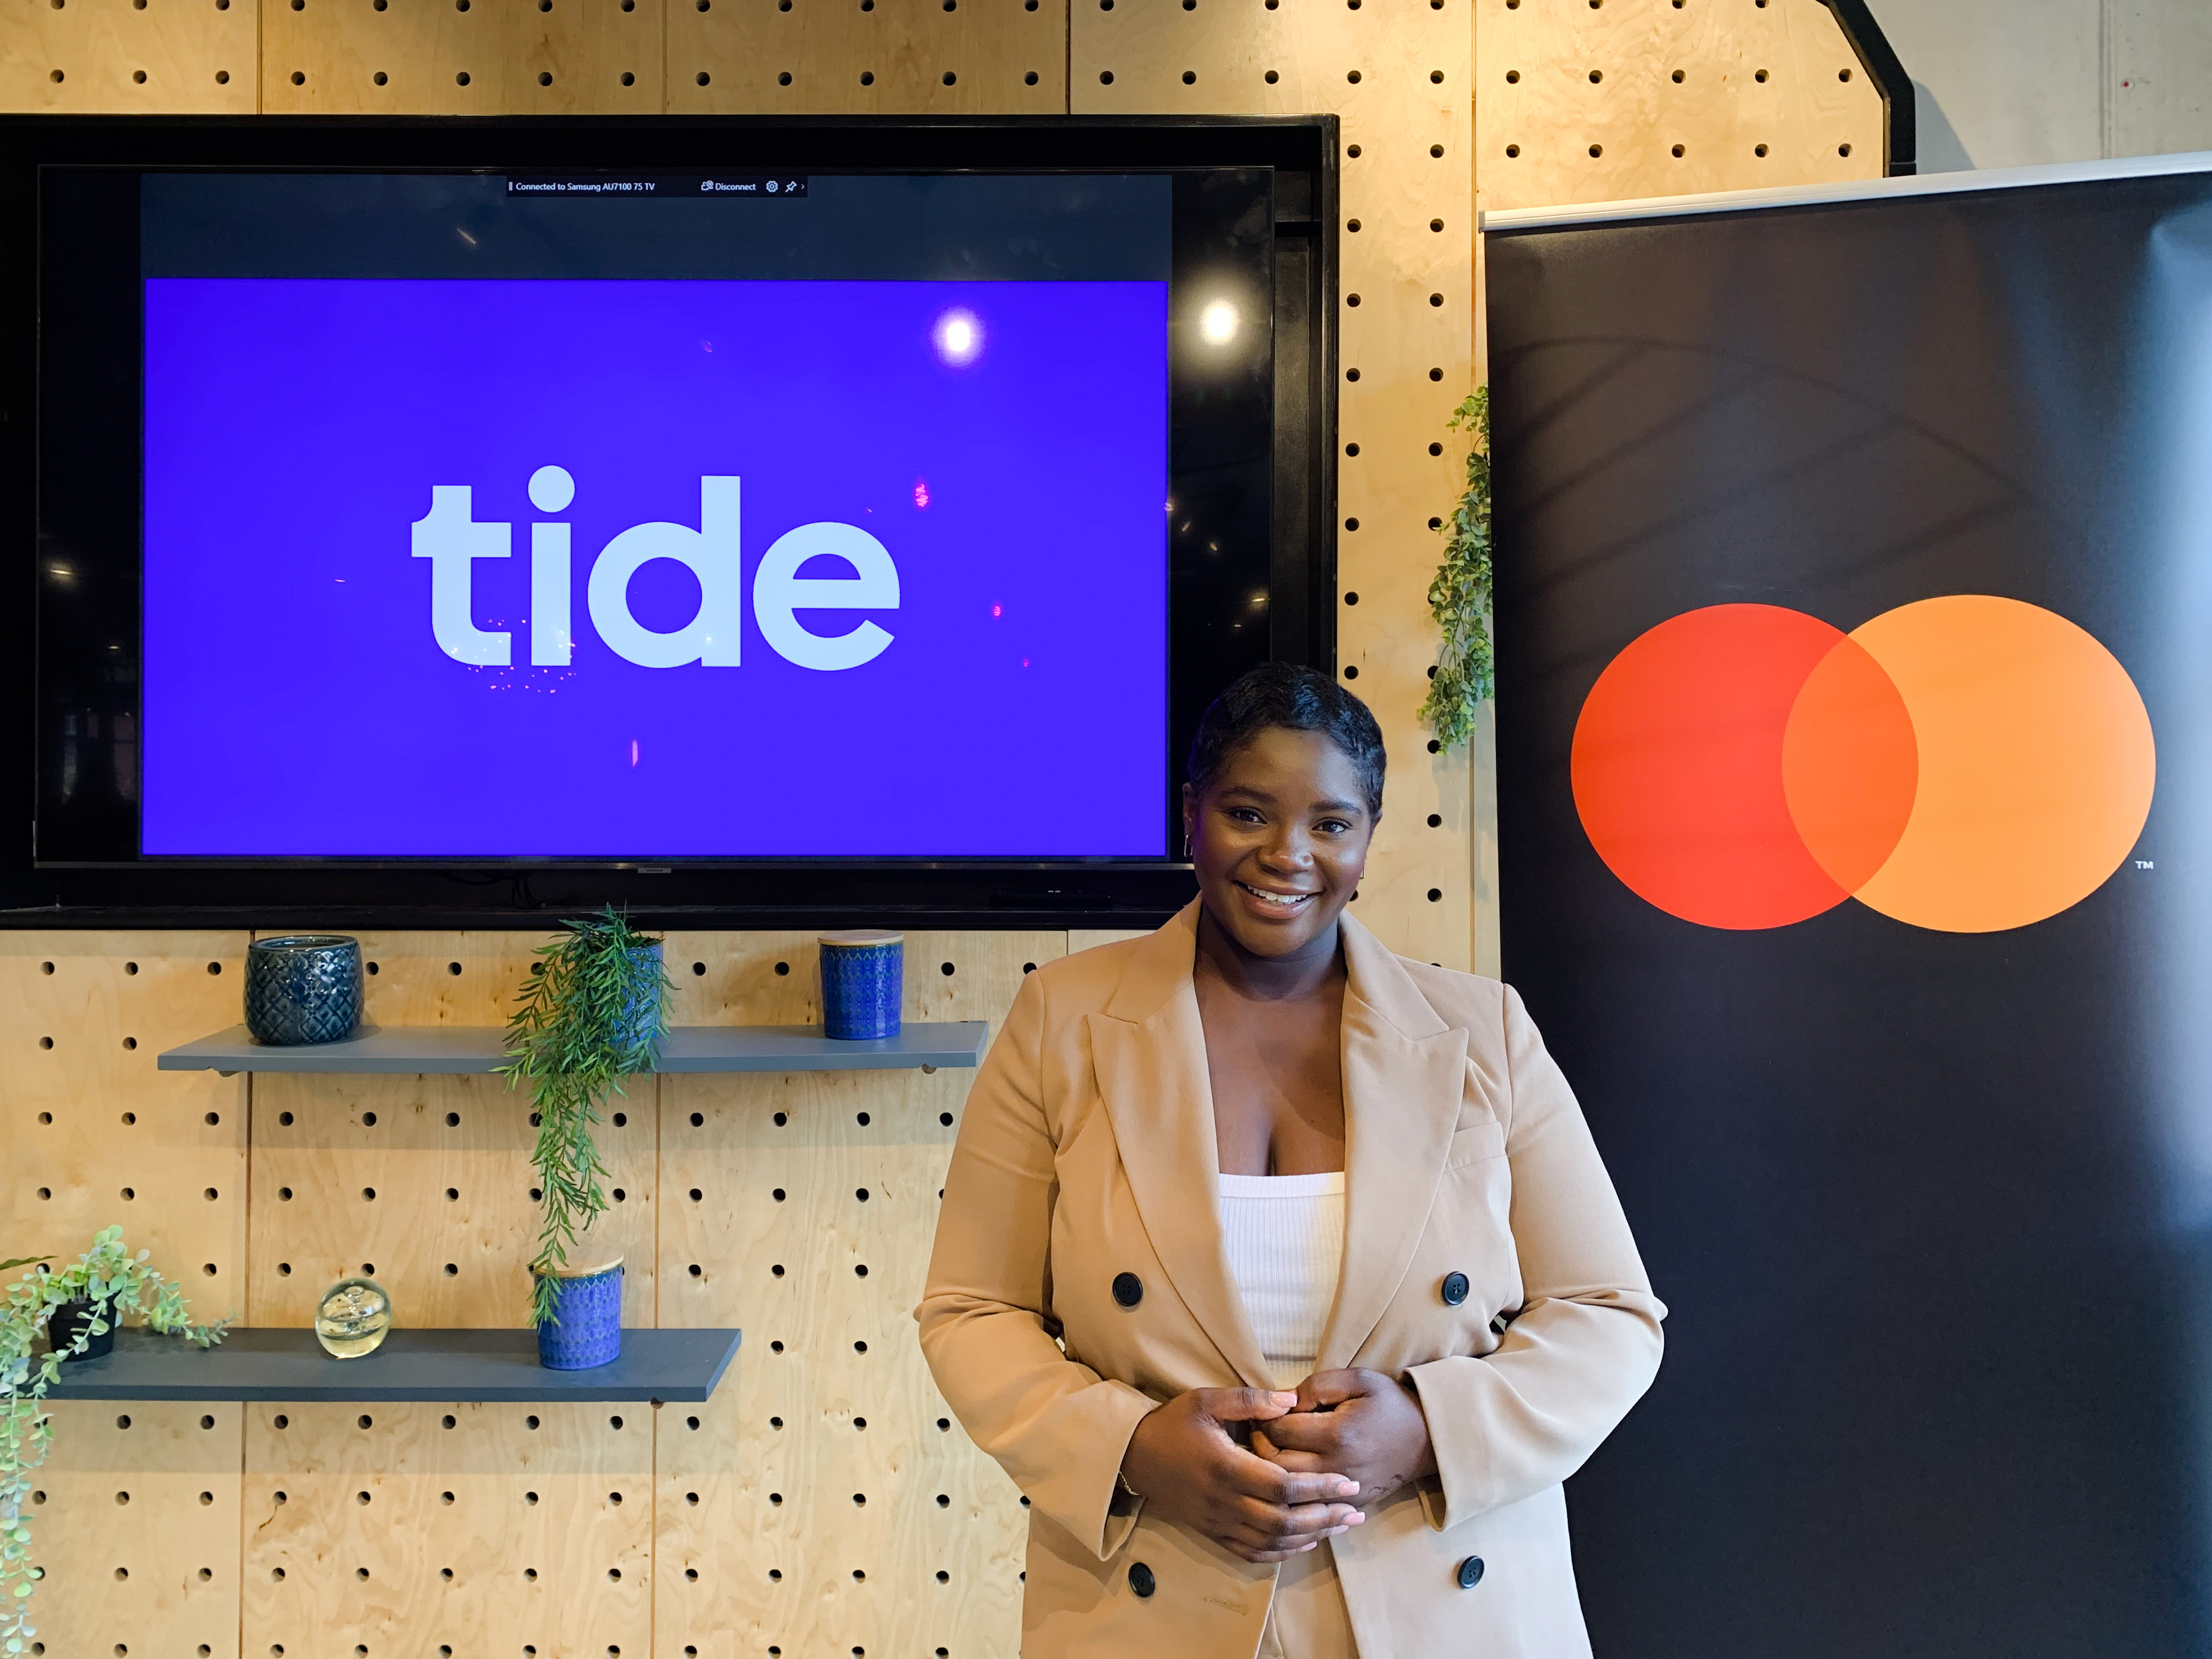 Tide member Atinuke Awe, who recently hosted a Mastercard Strive UK masterclass on ‘Accessing Alternative Finance’, as part of its Thrive Street event in Manchester, UK.